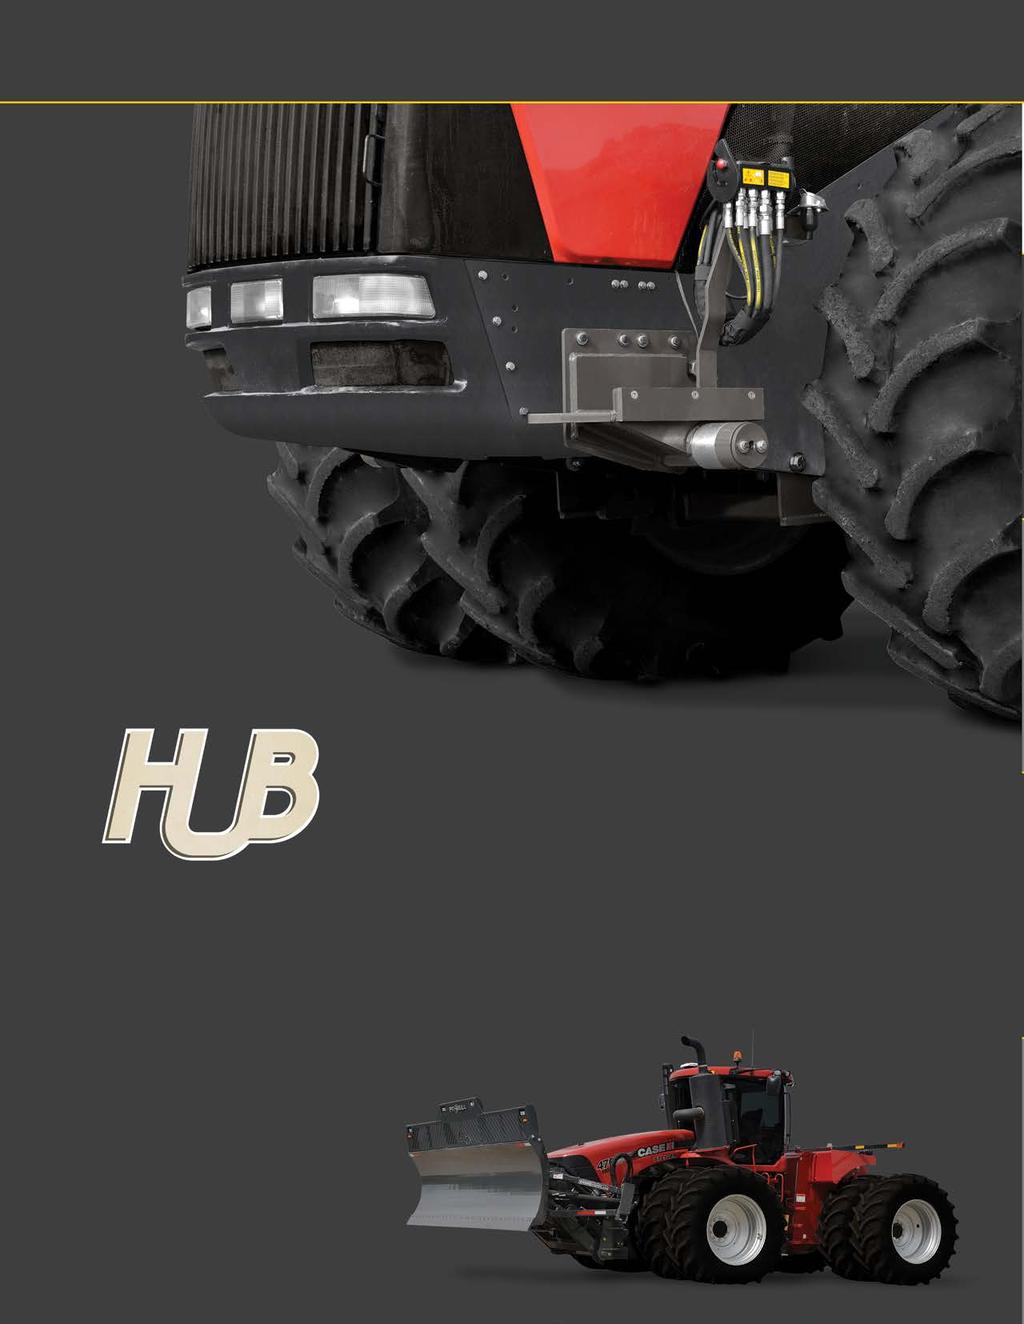 HITCHLESS UNDERMOUNT BRACKET Pitbull gives operators the most advanced blade in the market, featuring our exclusive HUB design, the industry s only parallel lift blade and hitchless undermount